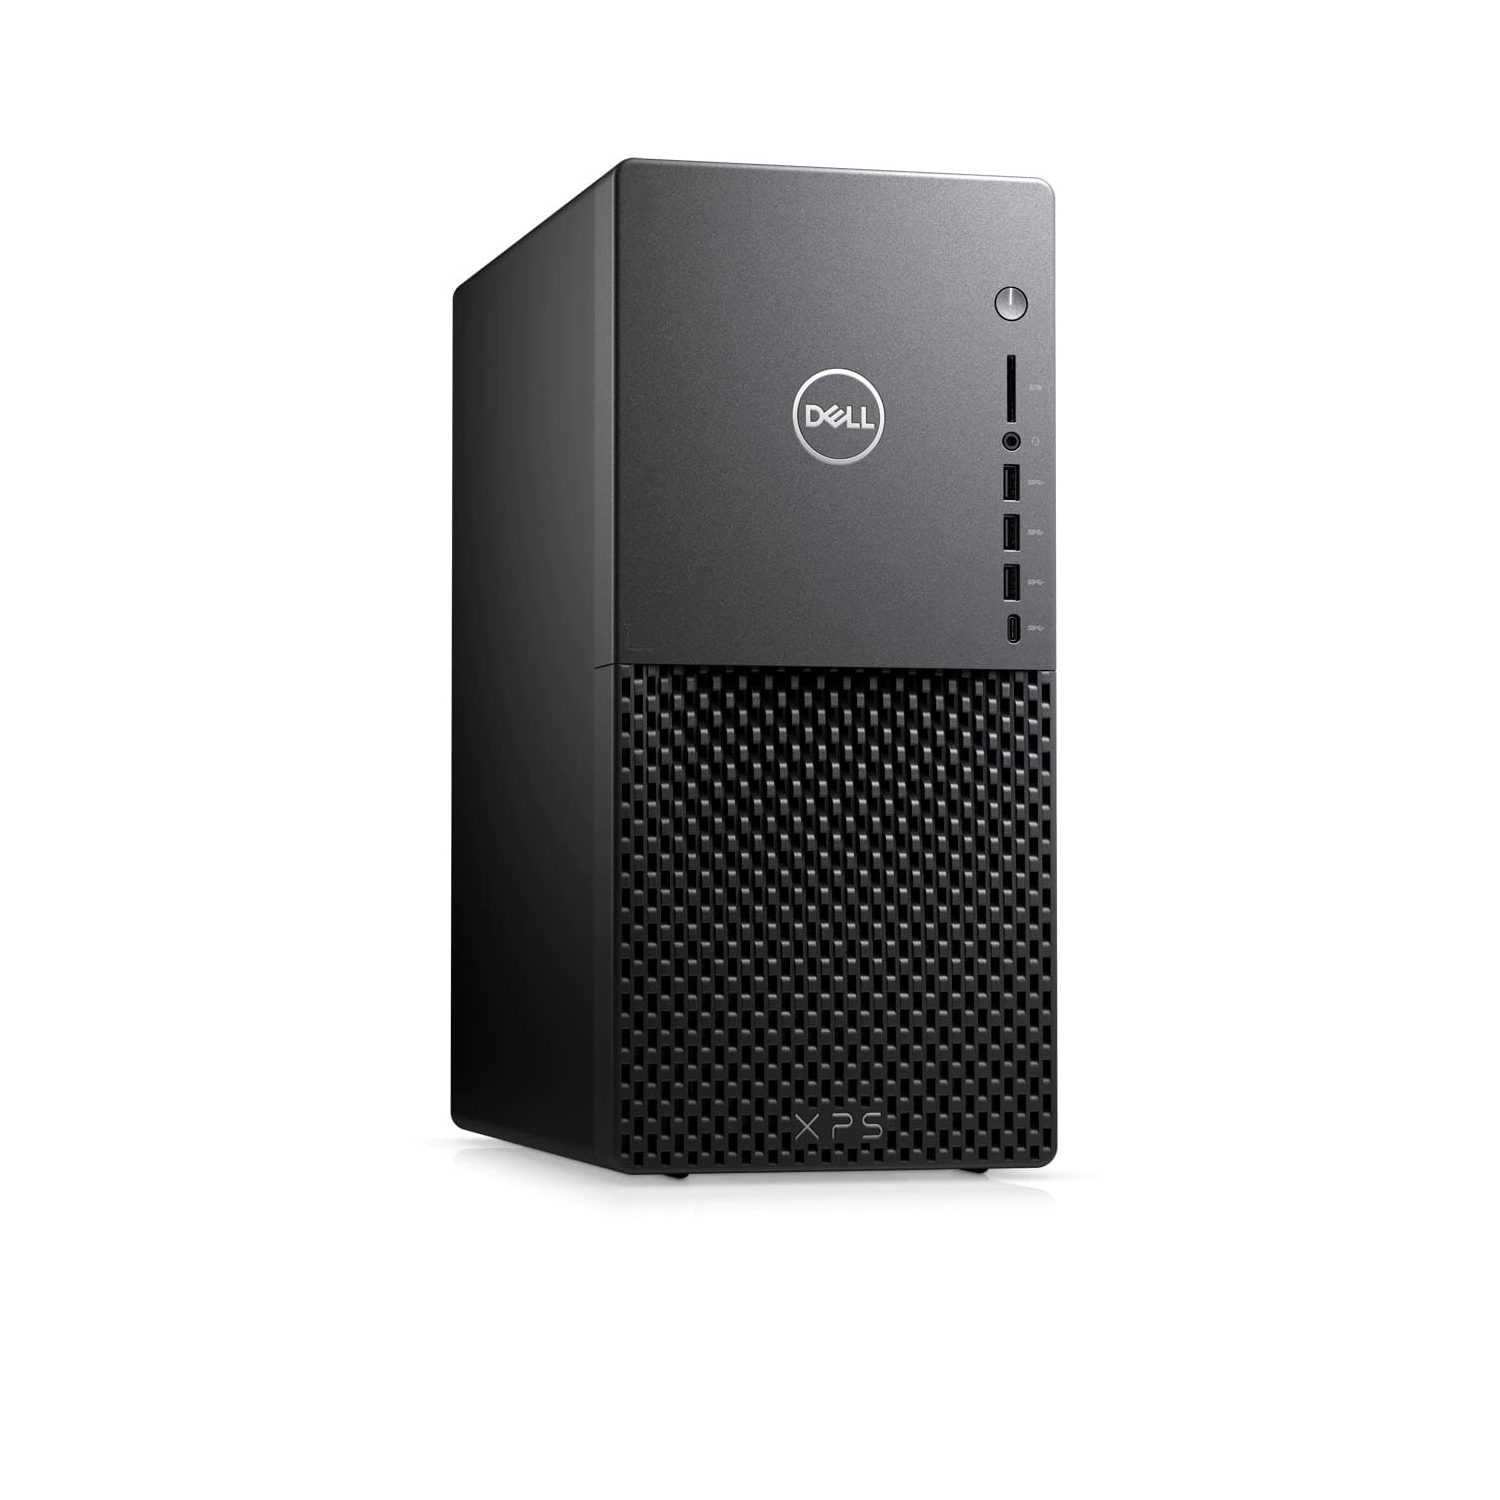 Refurbished (Excellent) - Dell XPS 8940 Desktop (2020) | Core i7 - 1TB SSD - 32GB RAM - 1660 Ti | 8 Cores @ 4.9 GHz - 11th Gen CPU Certified Refurbished